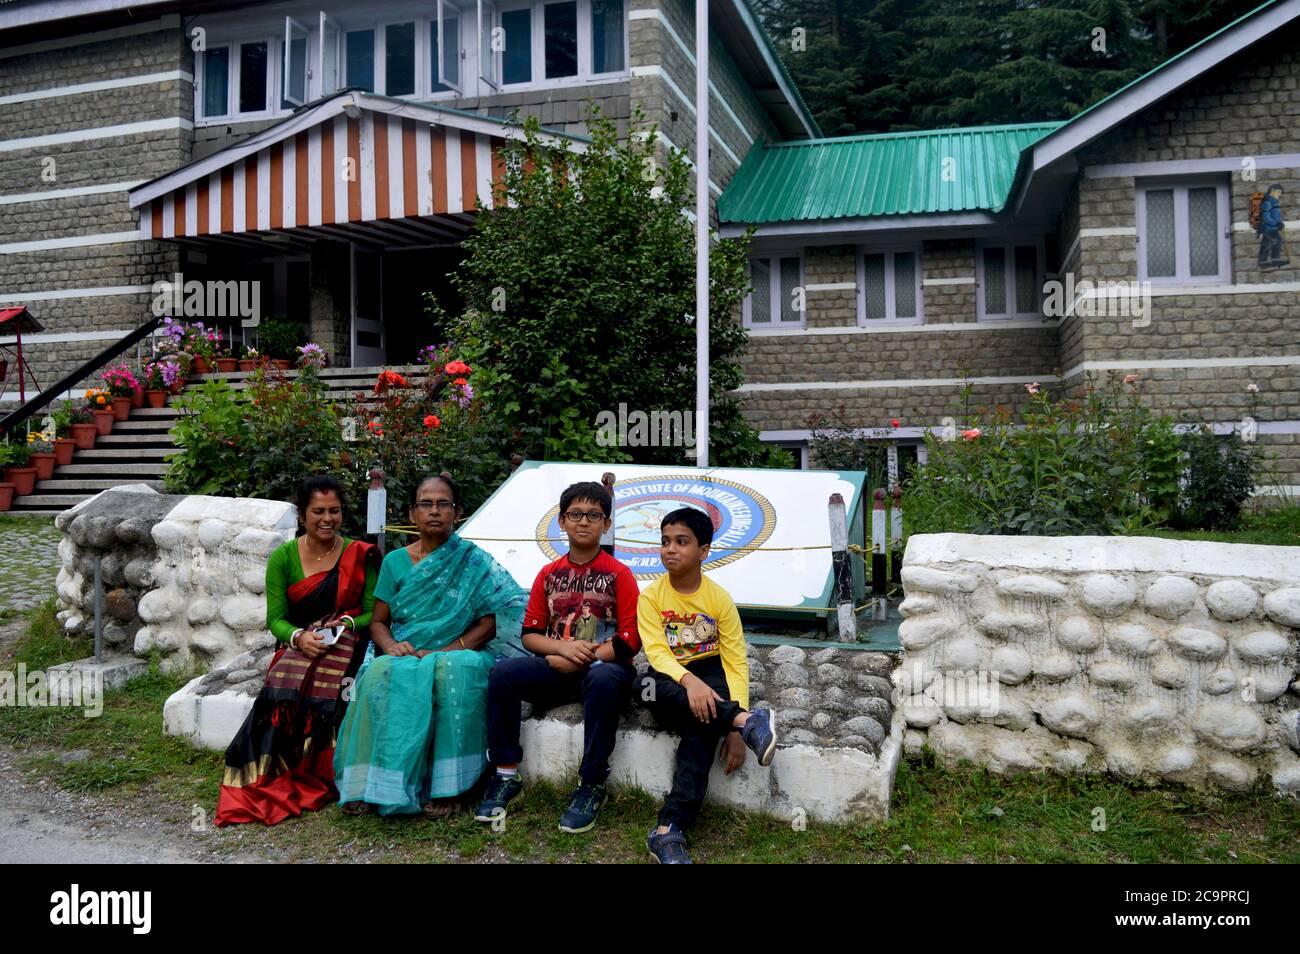 Two Indian women and children sitting in front of  AVBIMAS mountaineering institute, Manali, selective focusing Stock Photo